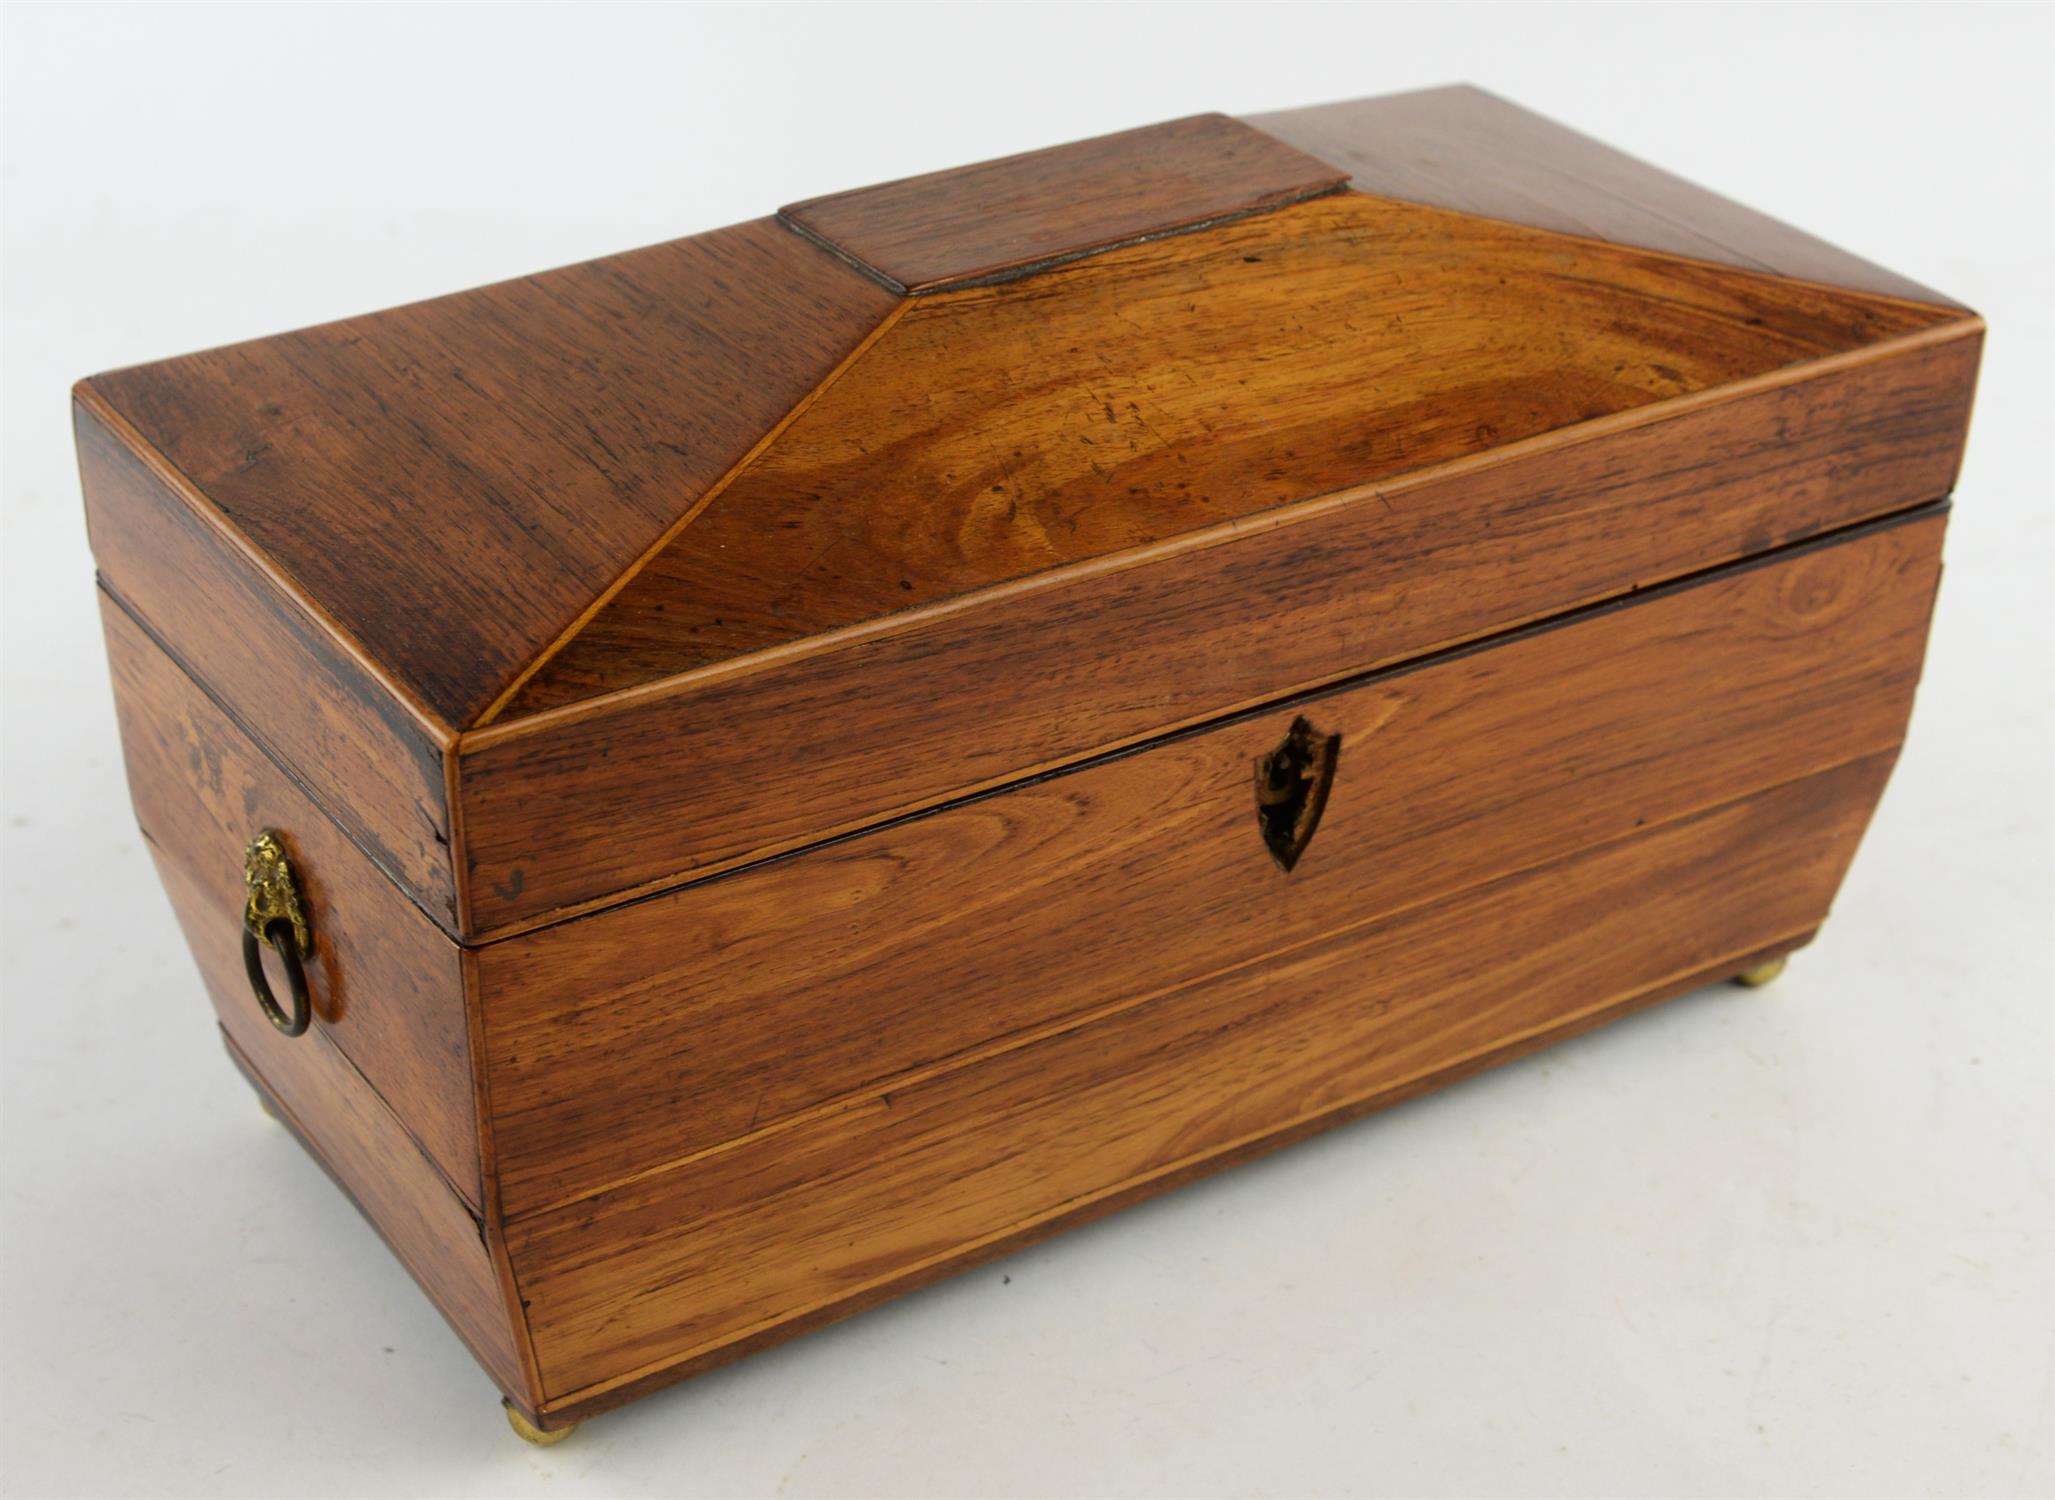 A Regency kingwood twin division tea caddy of sarcophagus form, with twin lion ring handles and